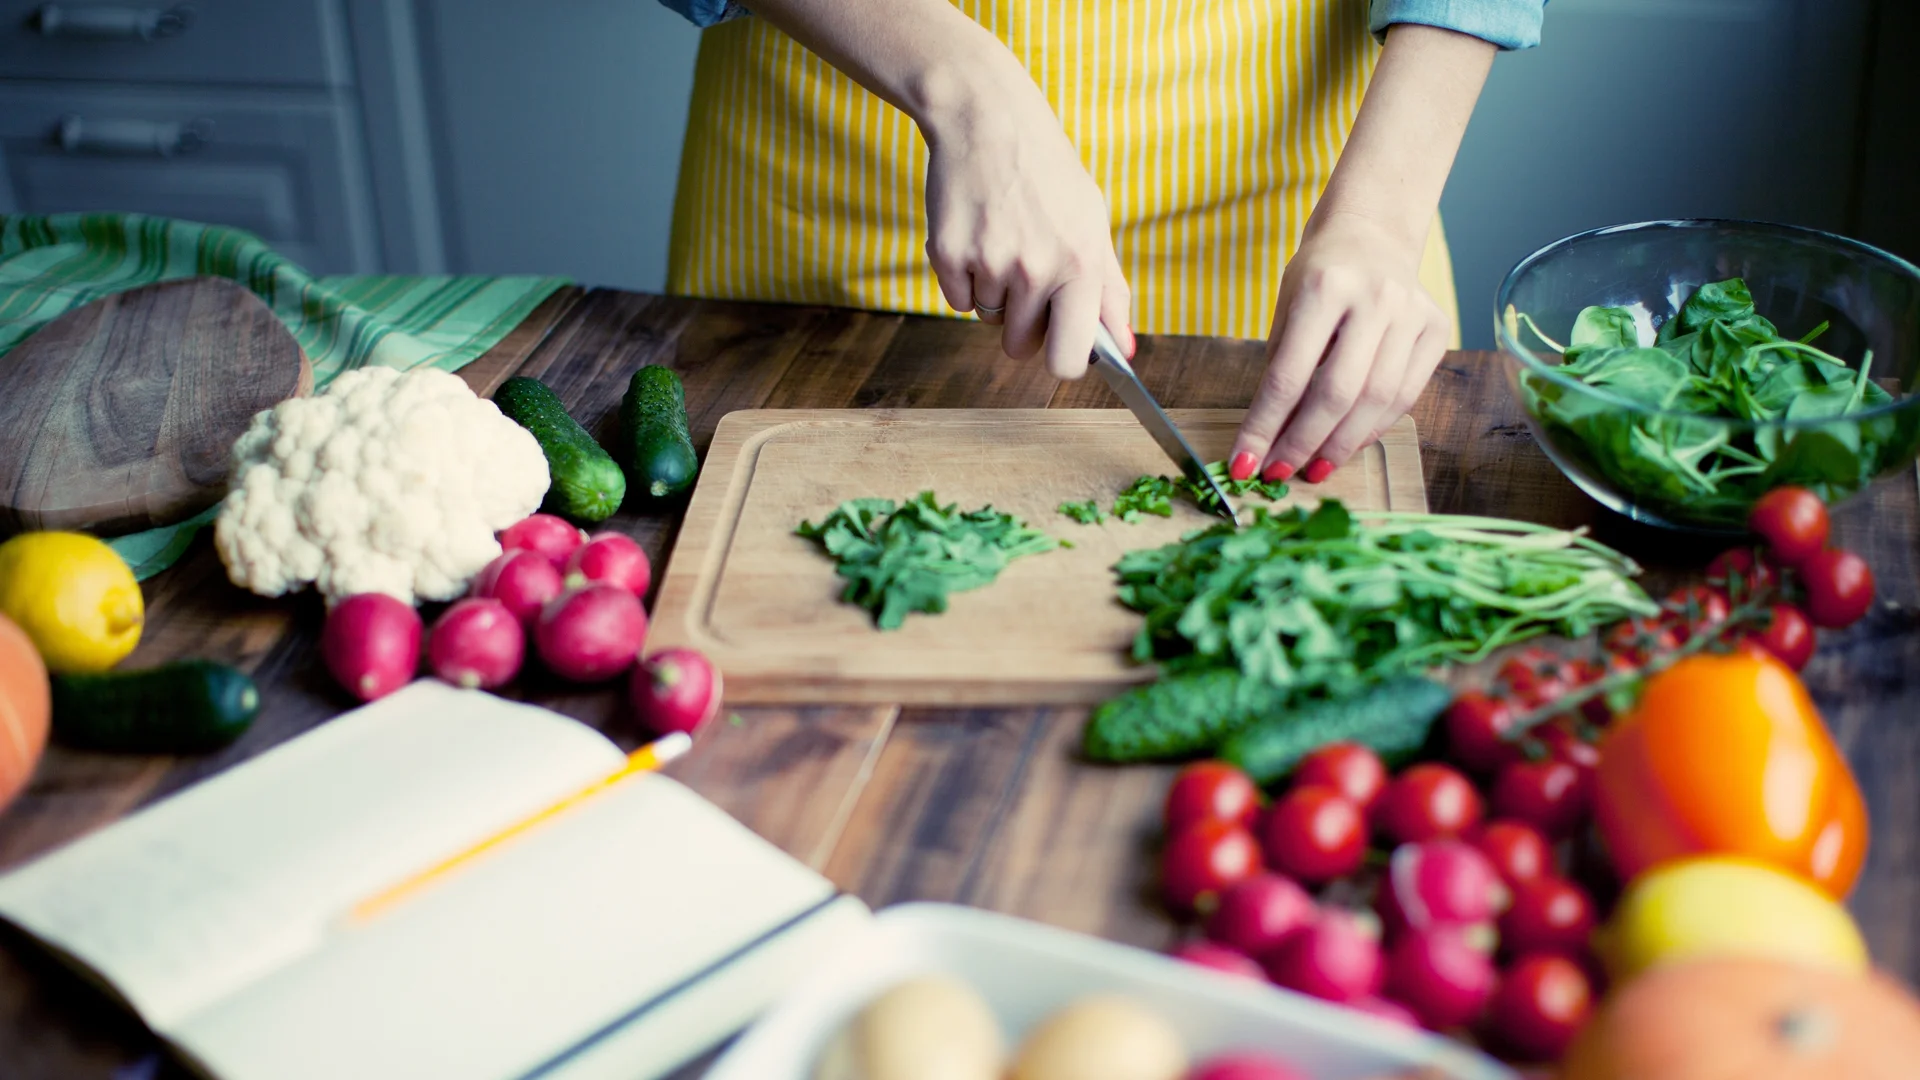 3 Reasons Getting Those Fresh Veggies to Your Table is More Complicate